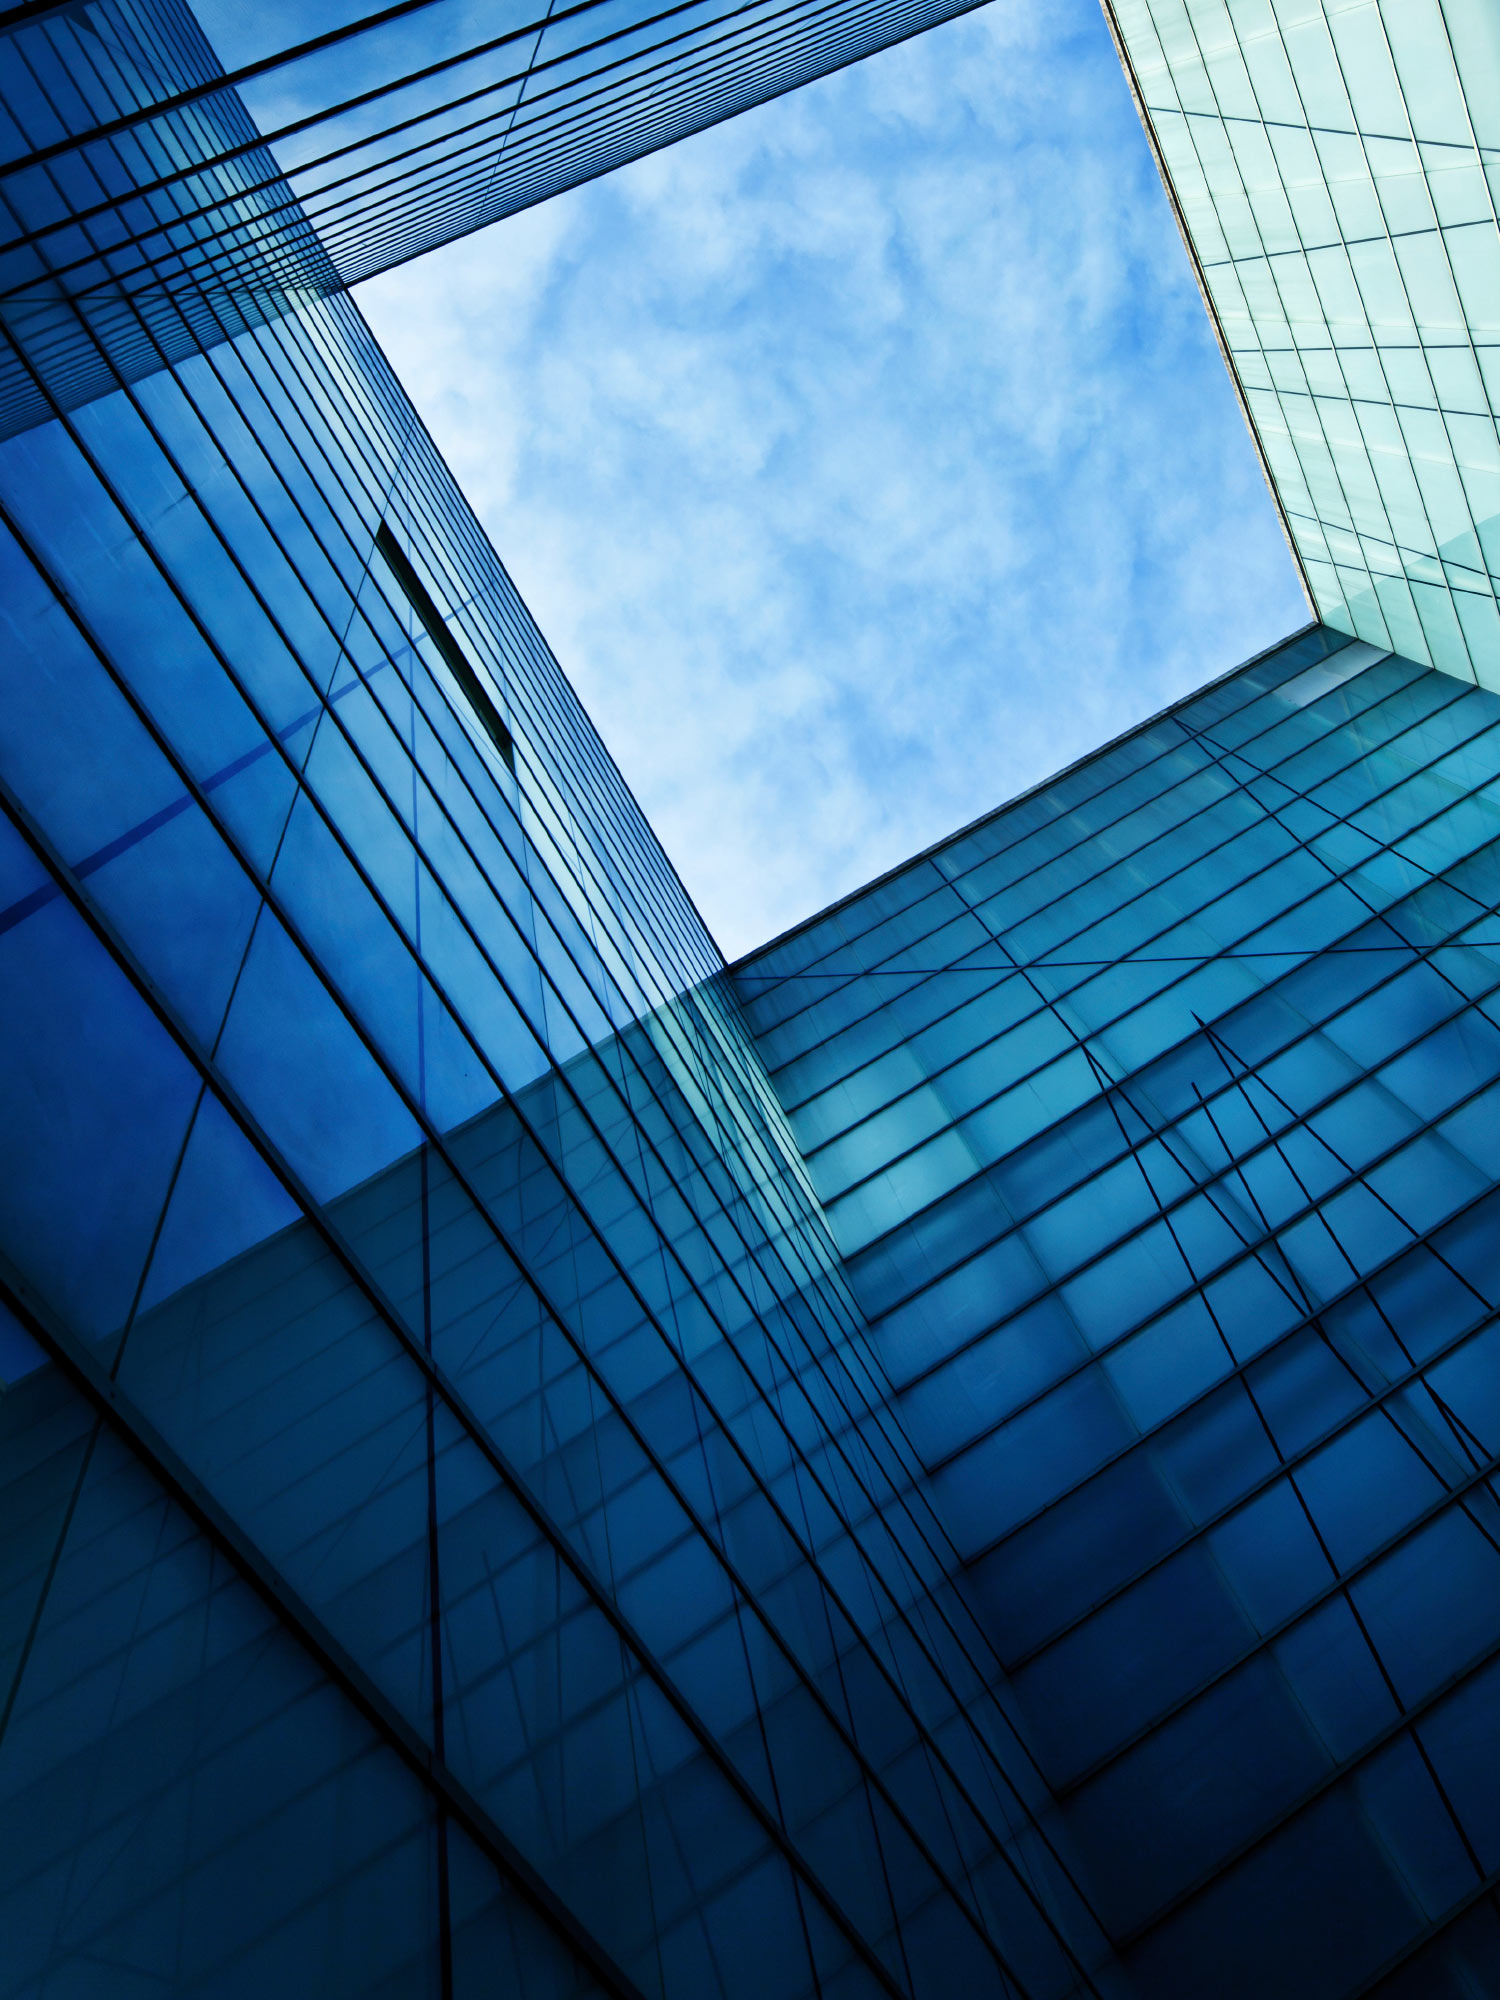 corporate wallpaper,blue,daytime,sky,architecture,commercial building